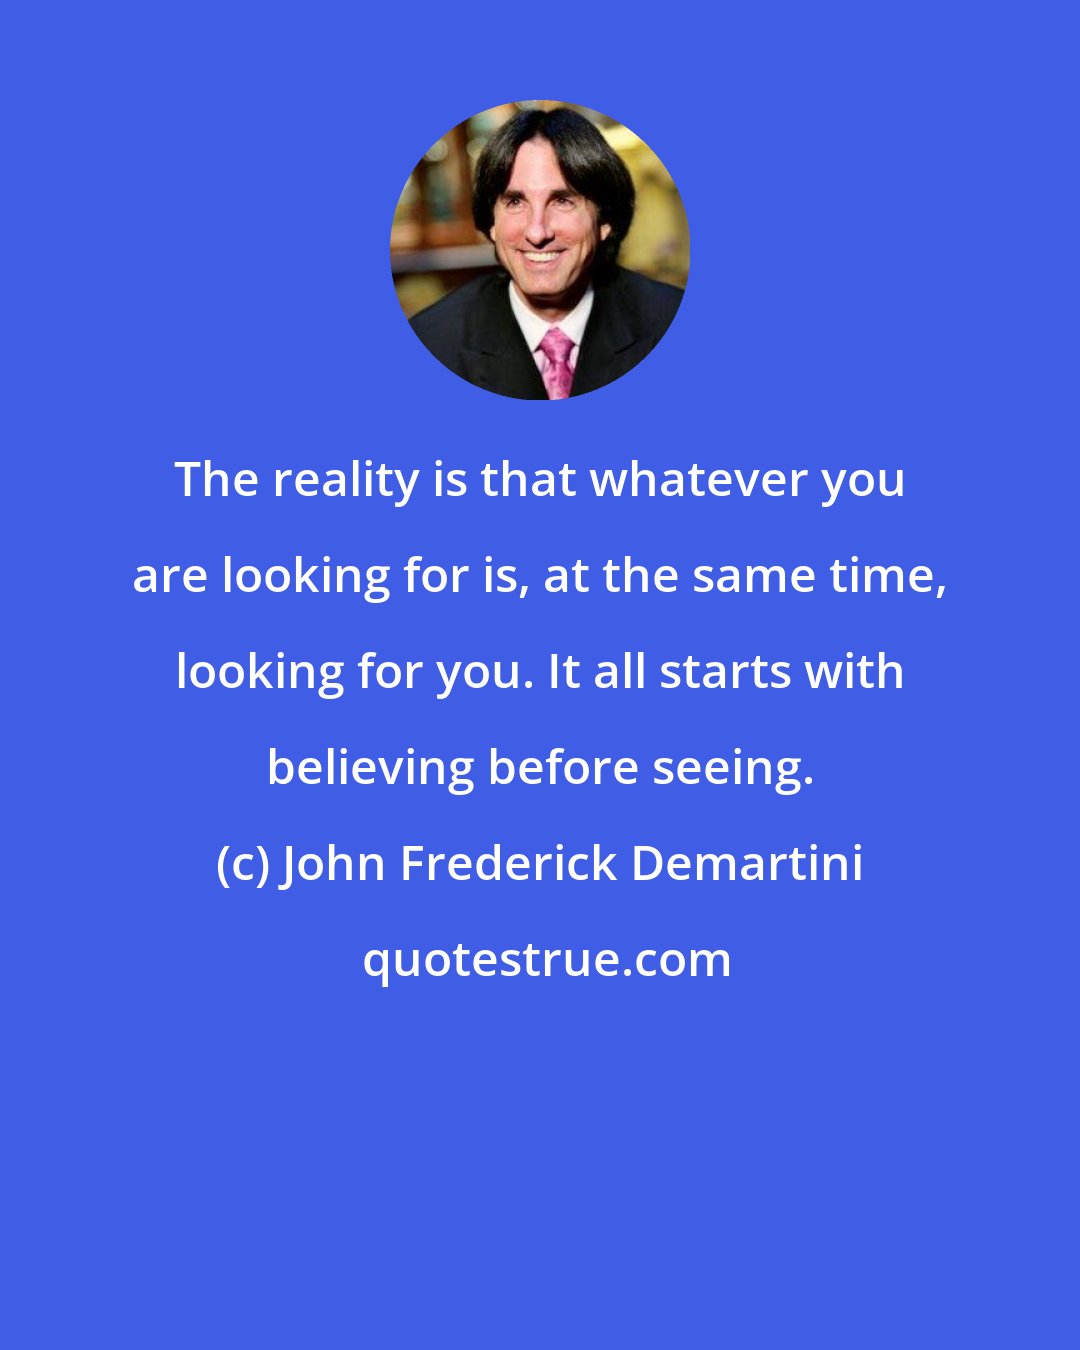 John Frederick Demartini: The reality is that whatever you are looking for is, at the same time, looking for you. It all starts with believing before seeing.